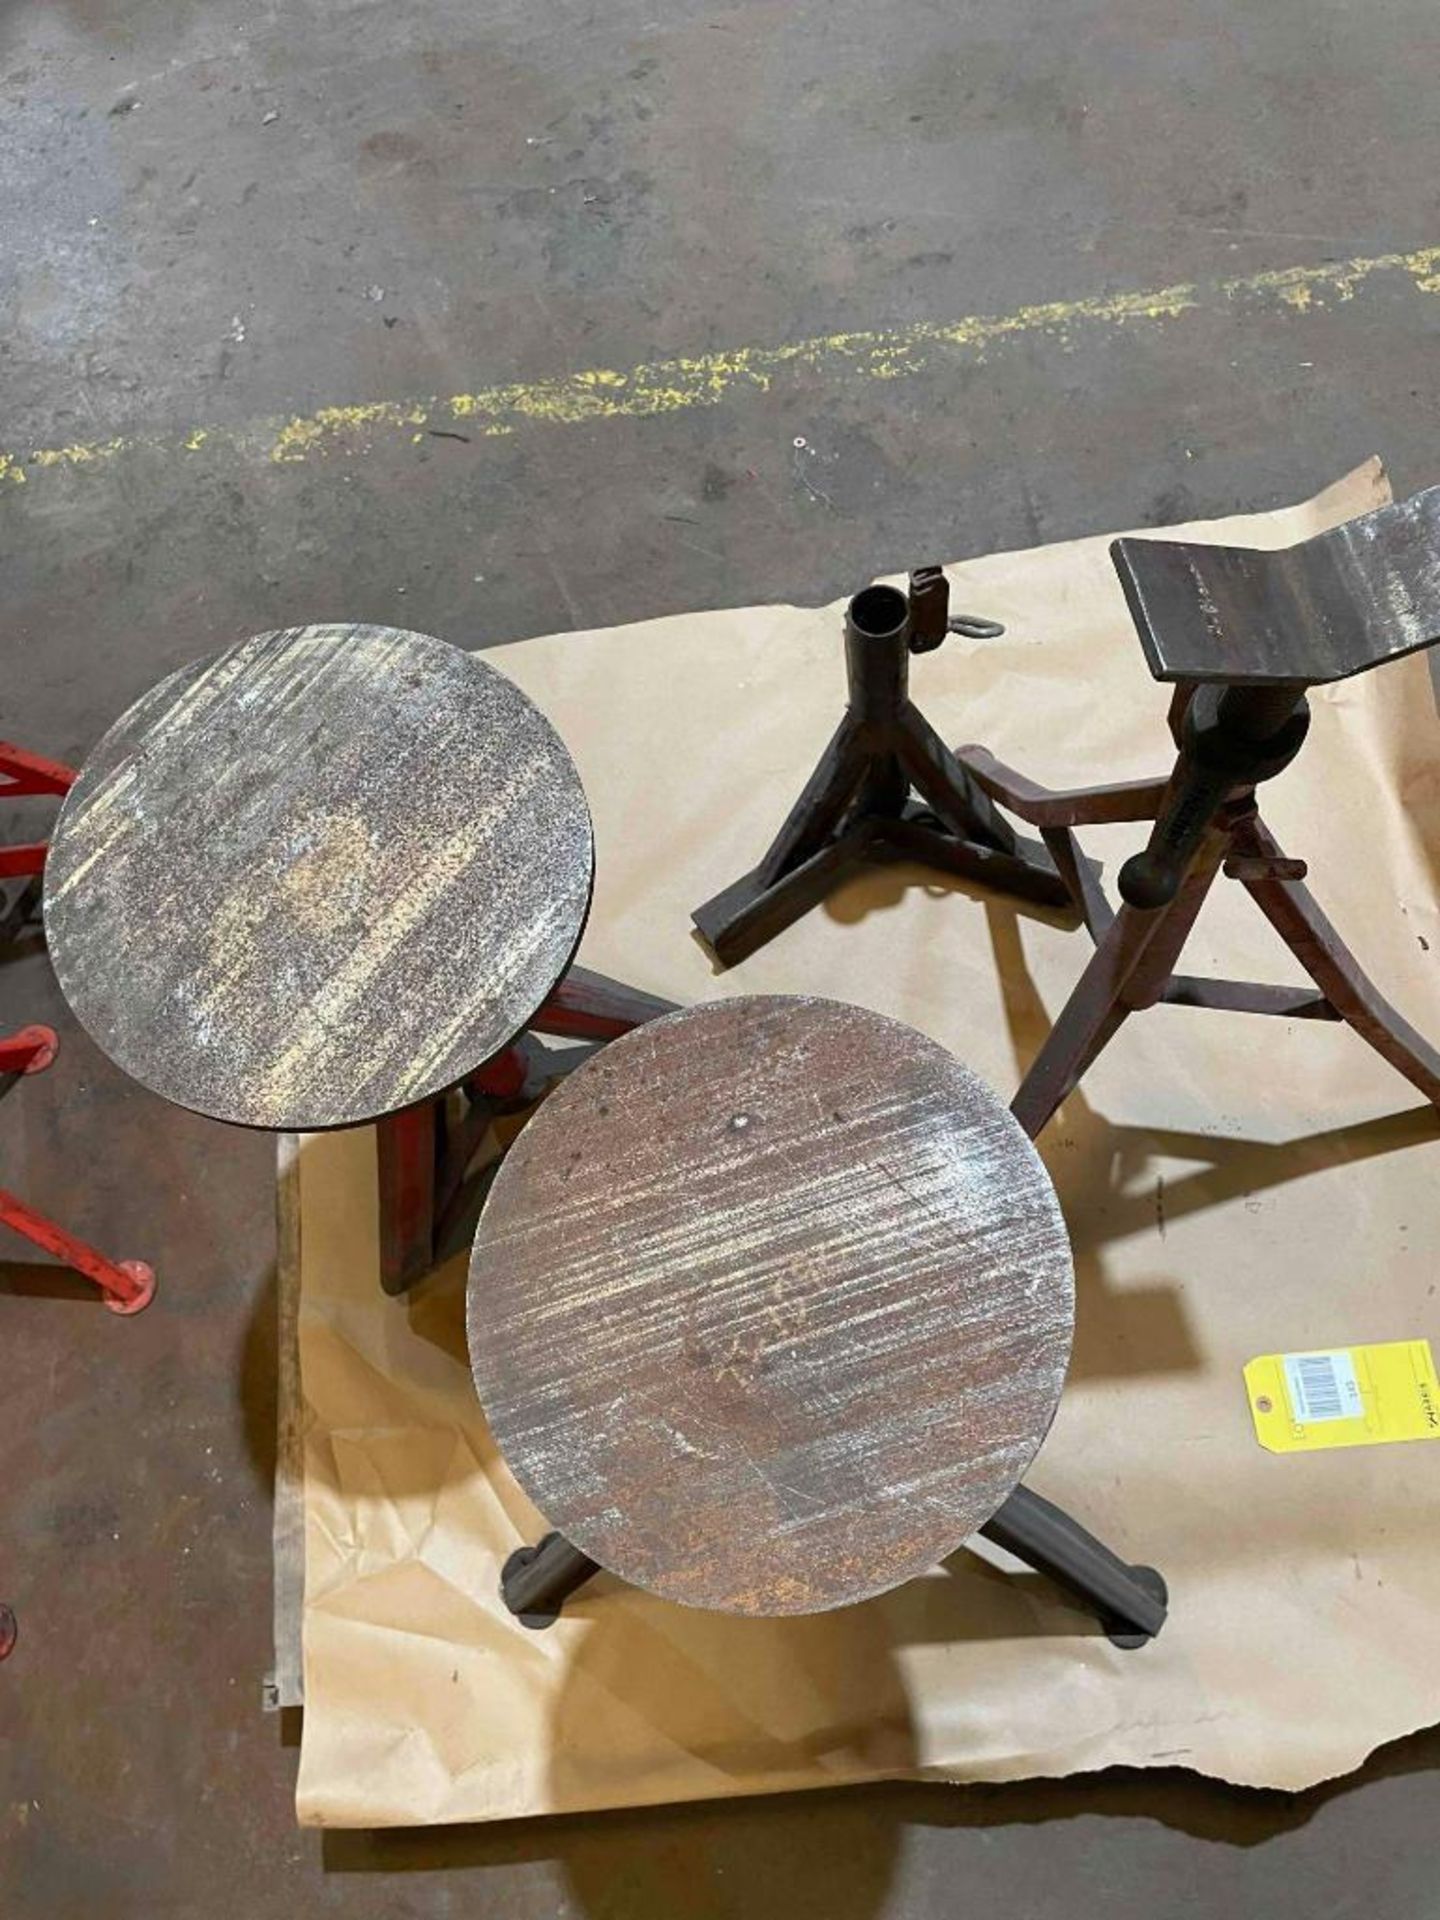 Lot of 3 Stands: (2) Circular Stands, (1) V Stand - Image 5 of 6